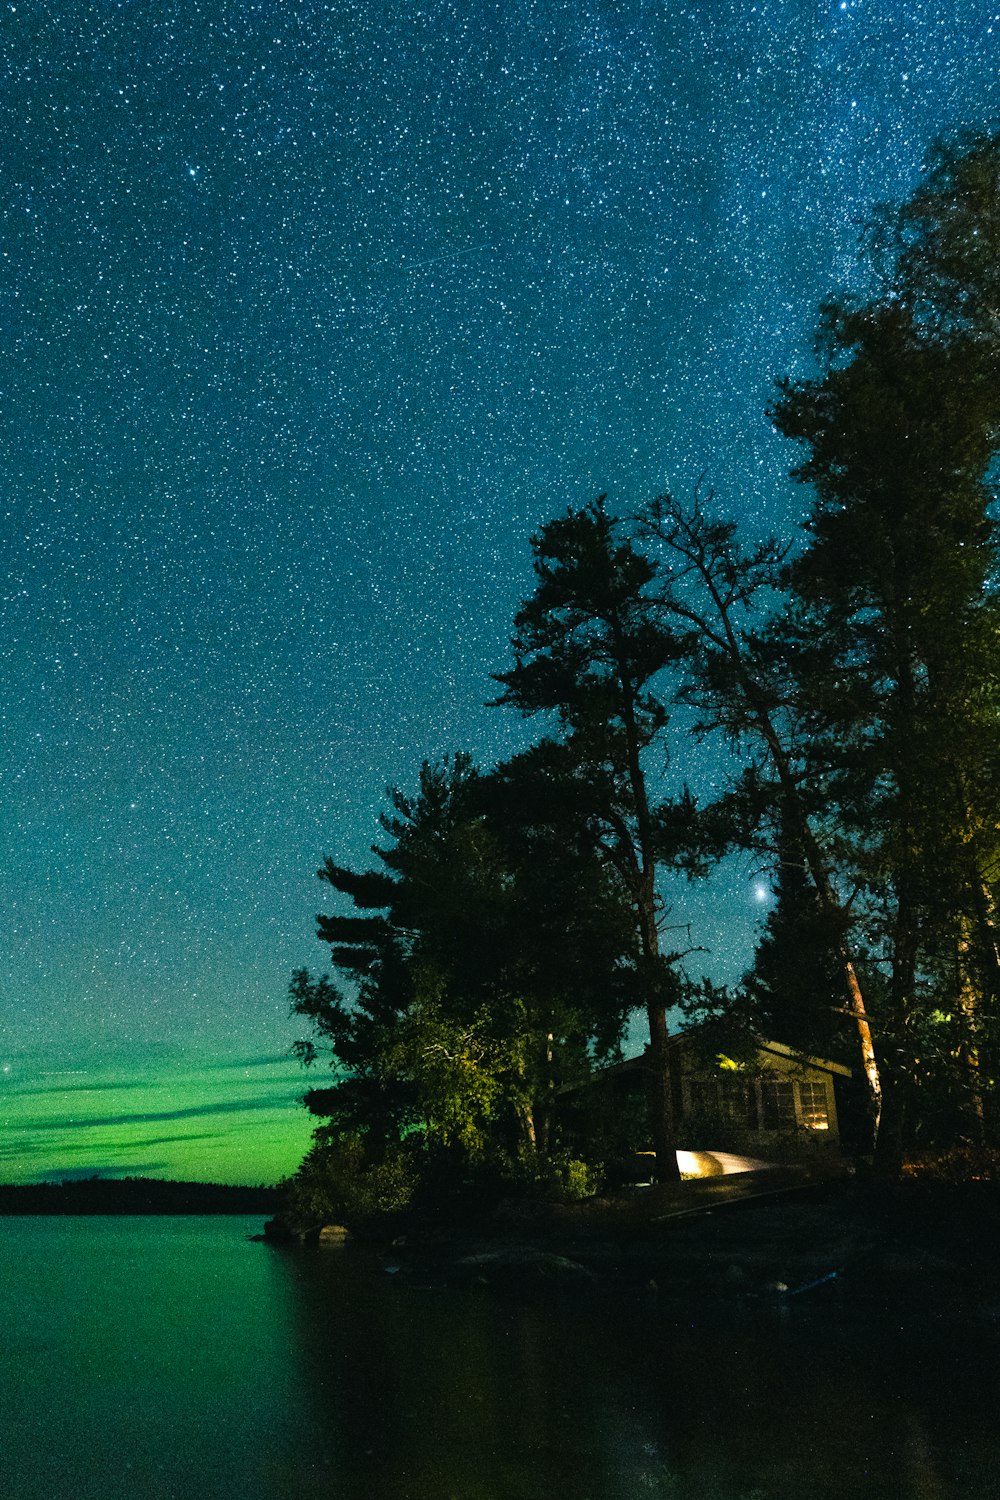 the night sky is lit up over a small island